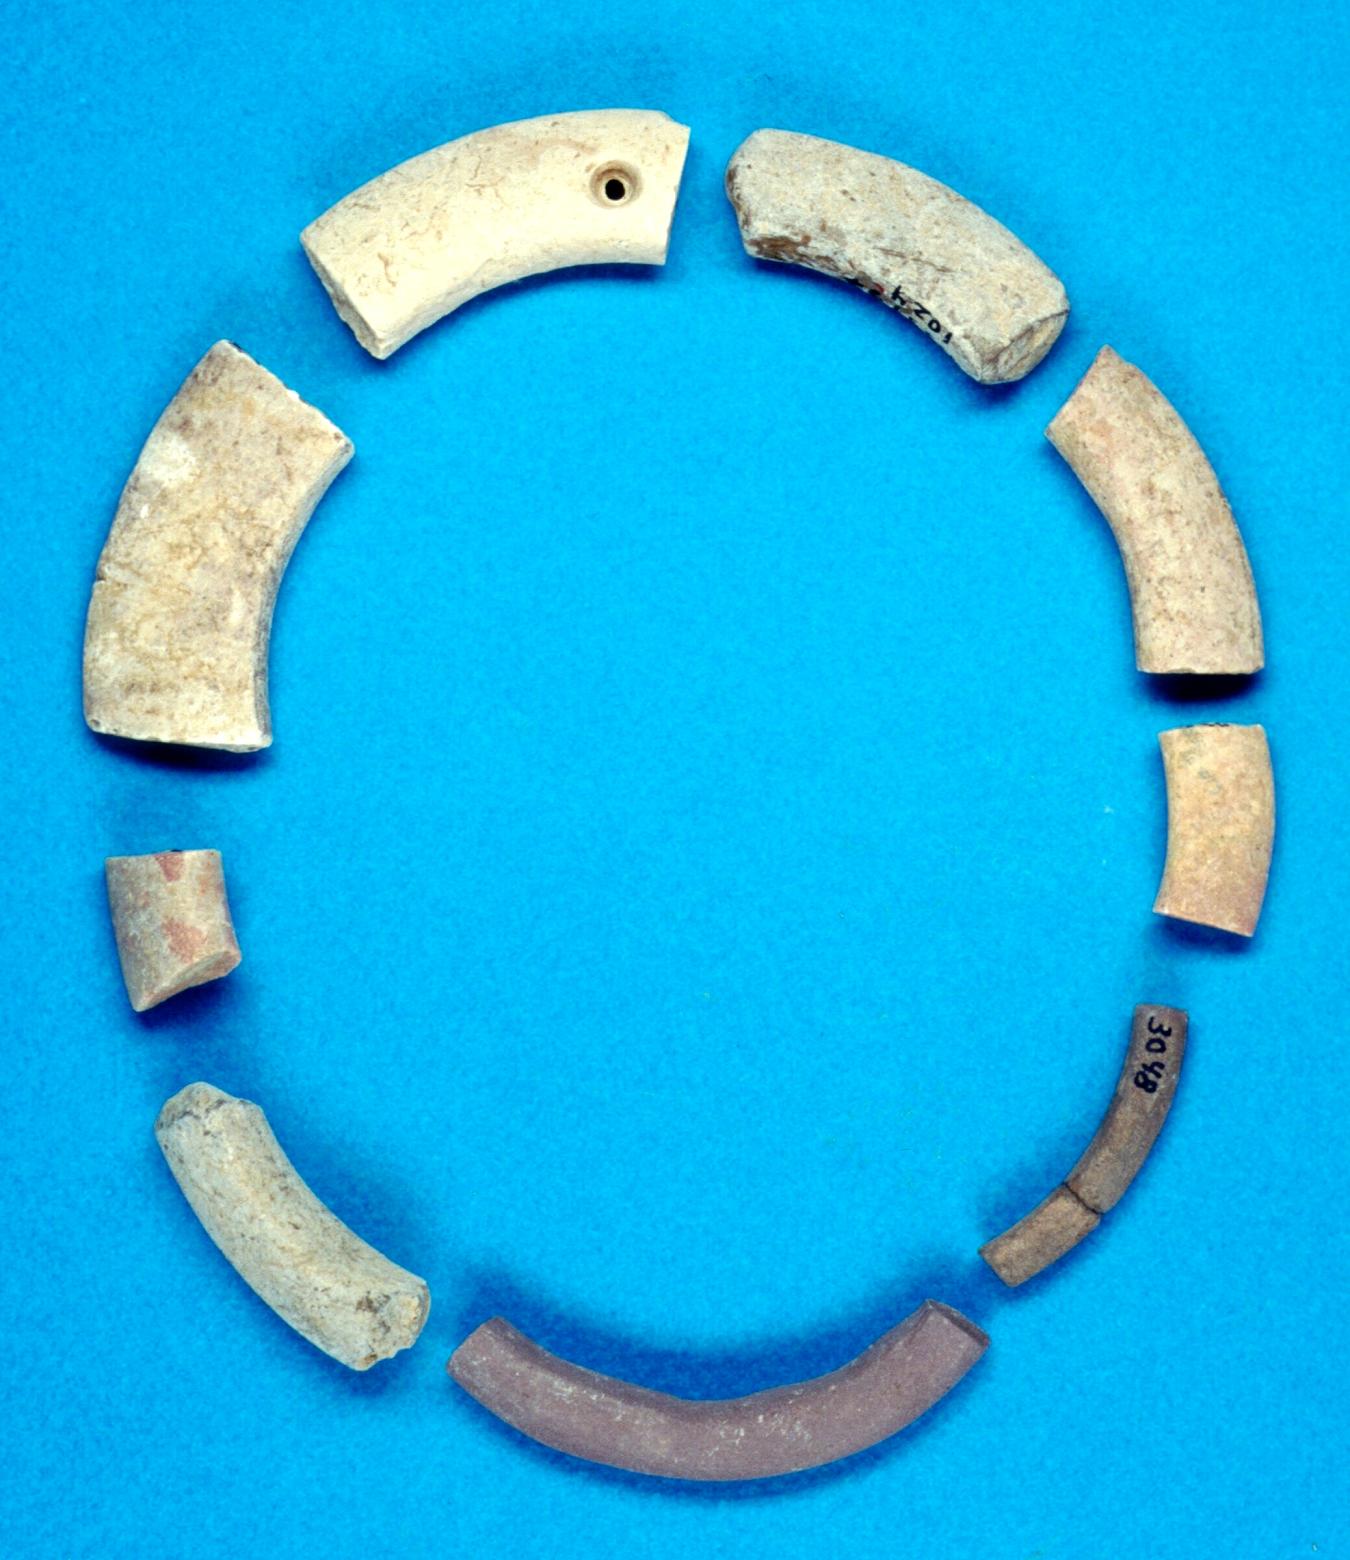 Limestone rings from Pre-Pottery Neolithic C Ashkelon